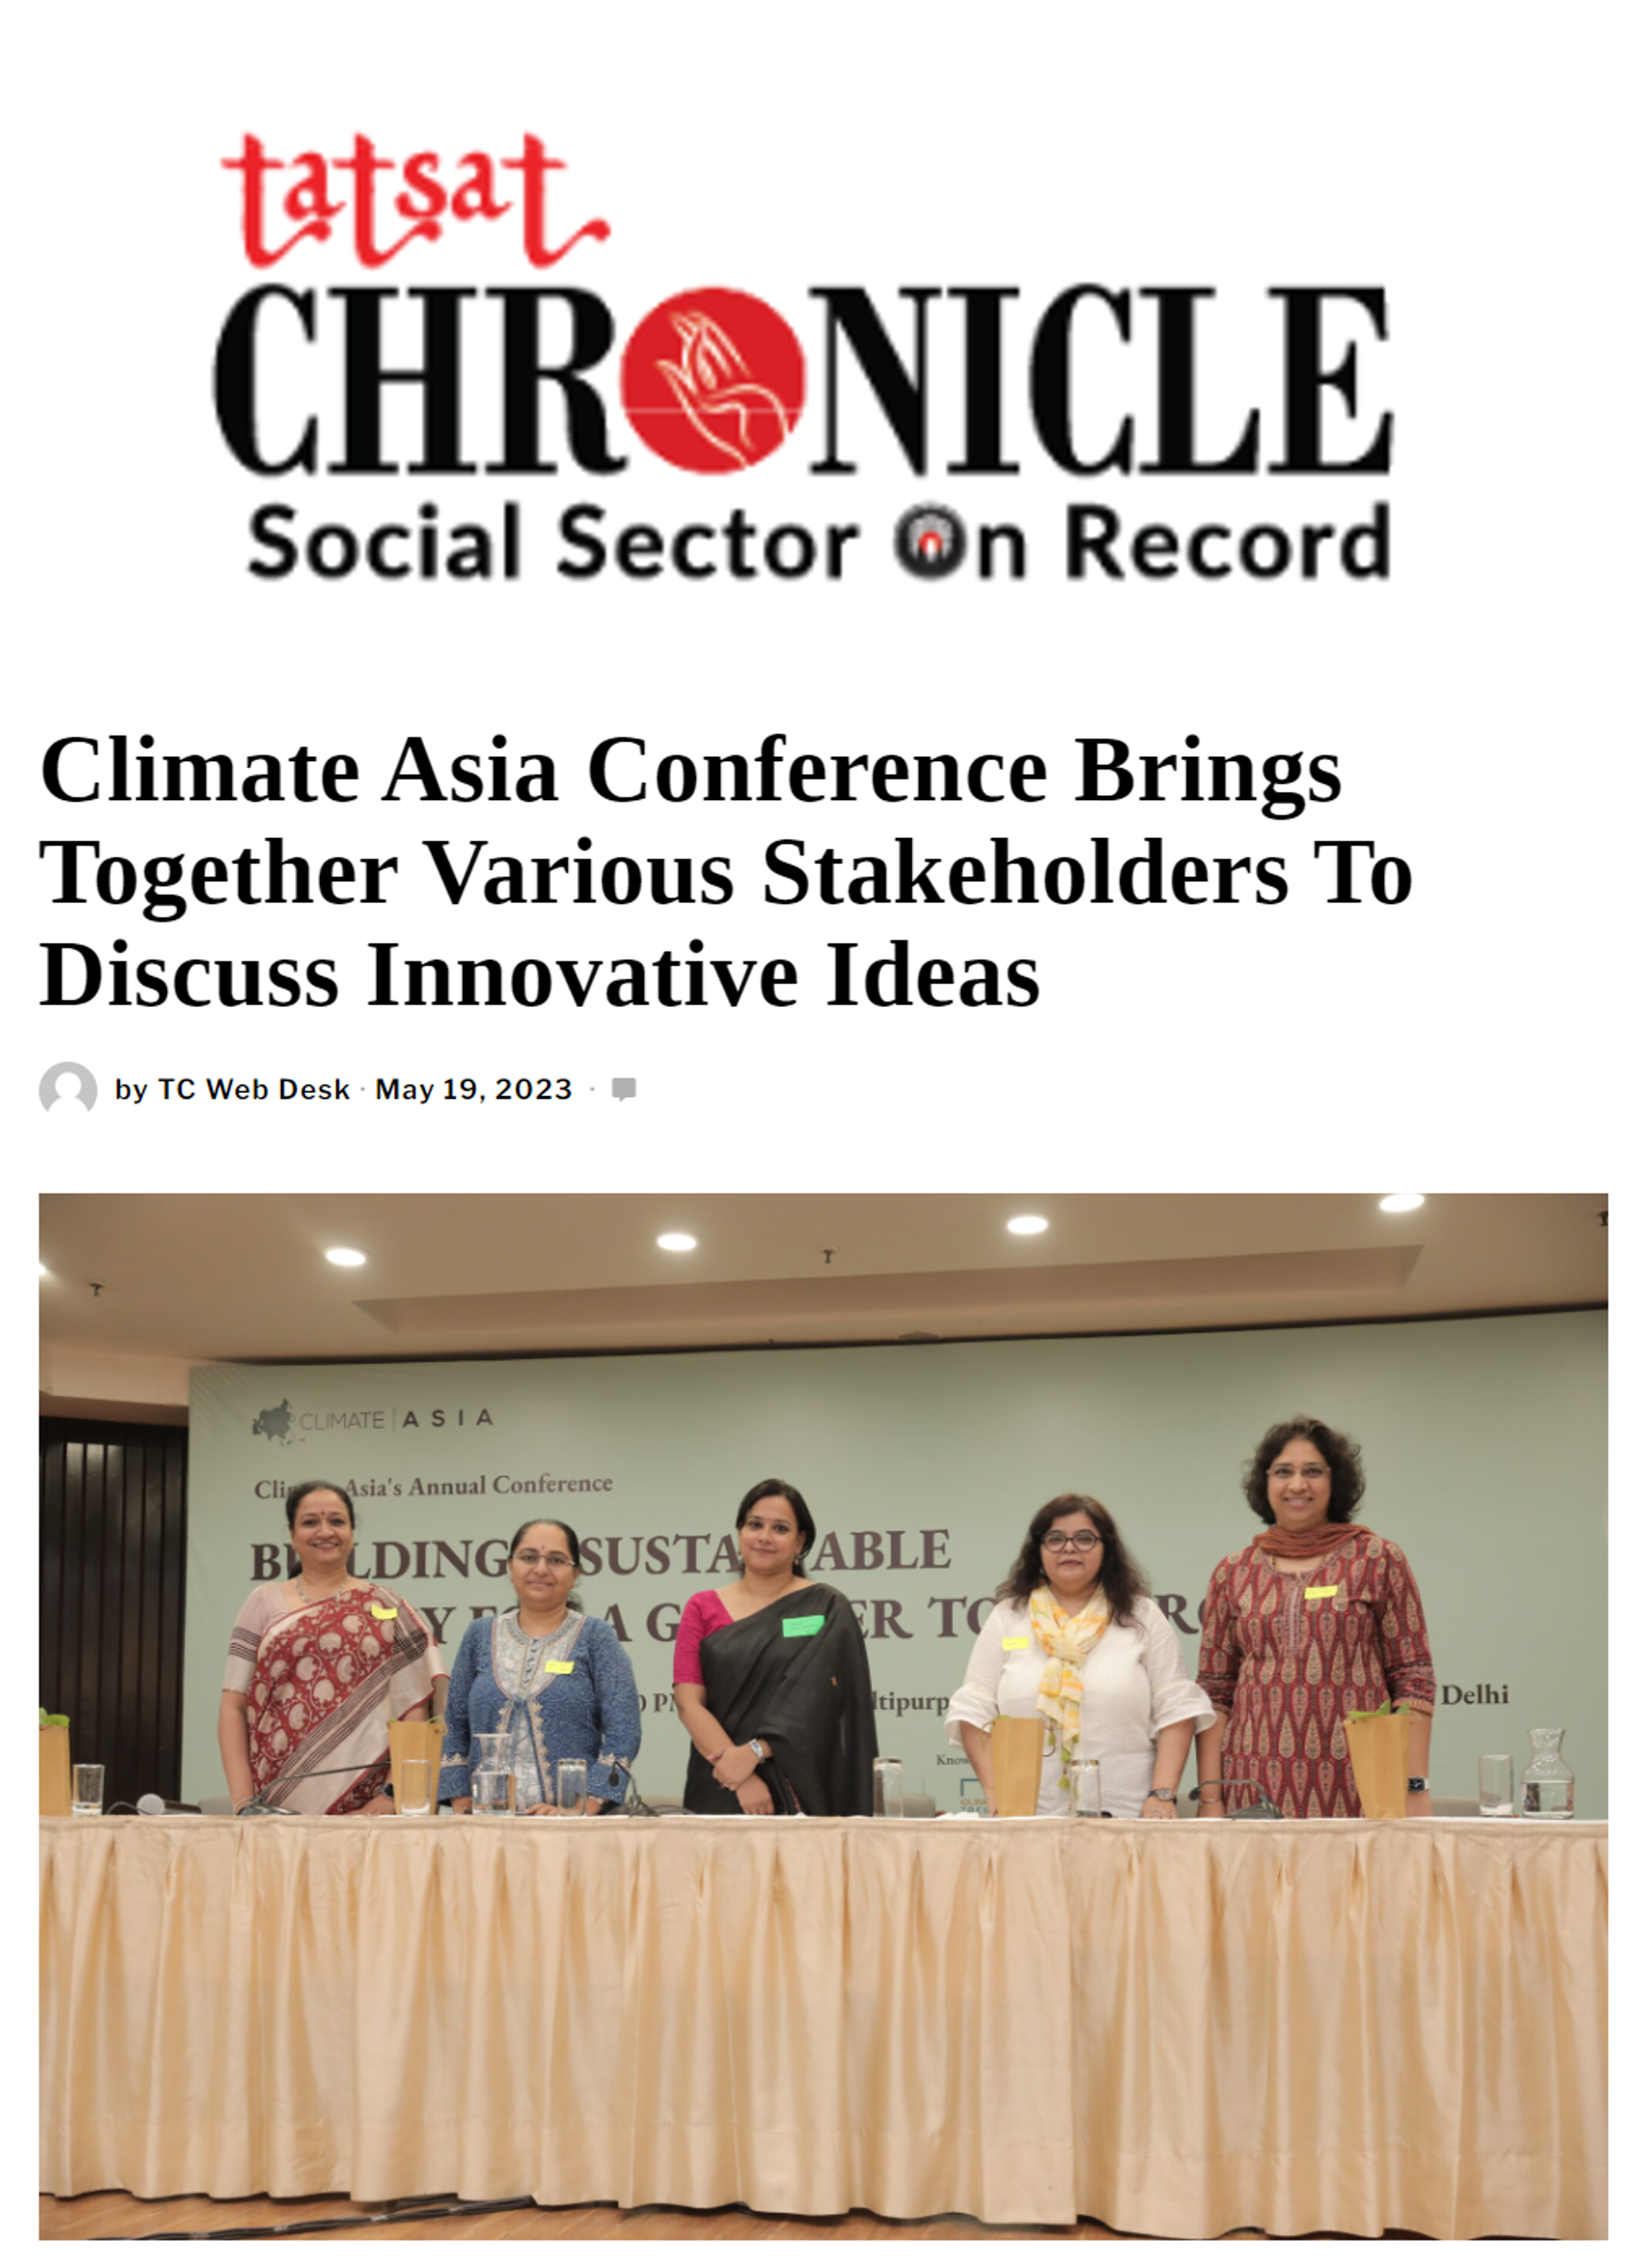 Dr Indu K Murthy mentioned as a speaker at the annual Climate Asia conference by Tatsat Chronicle